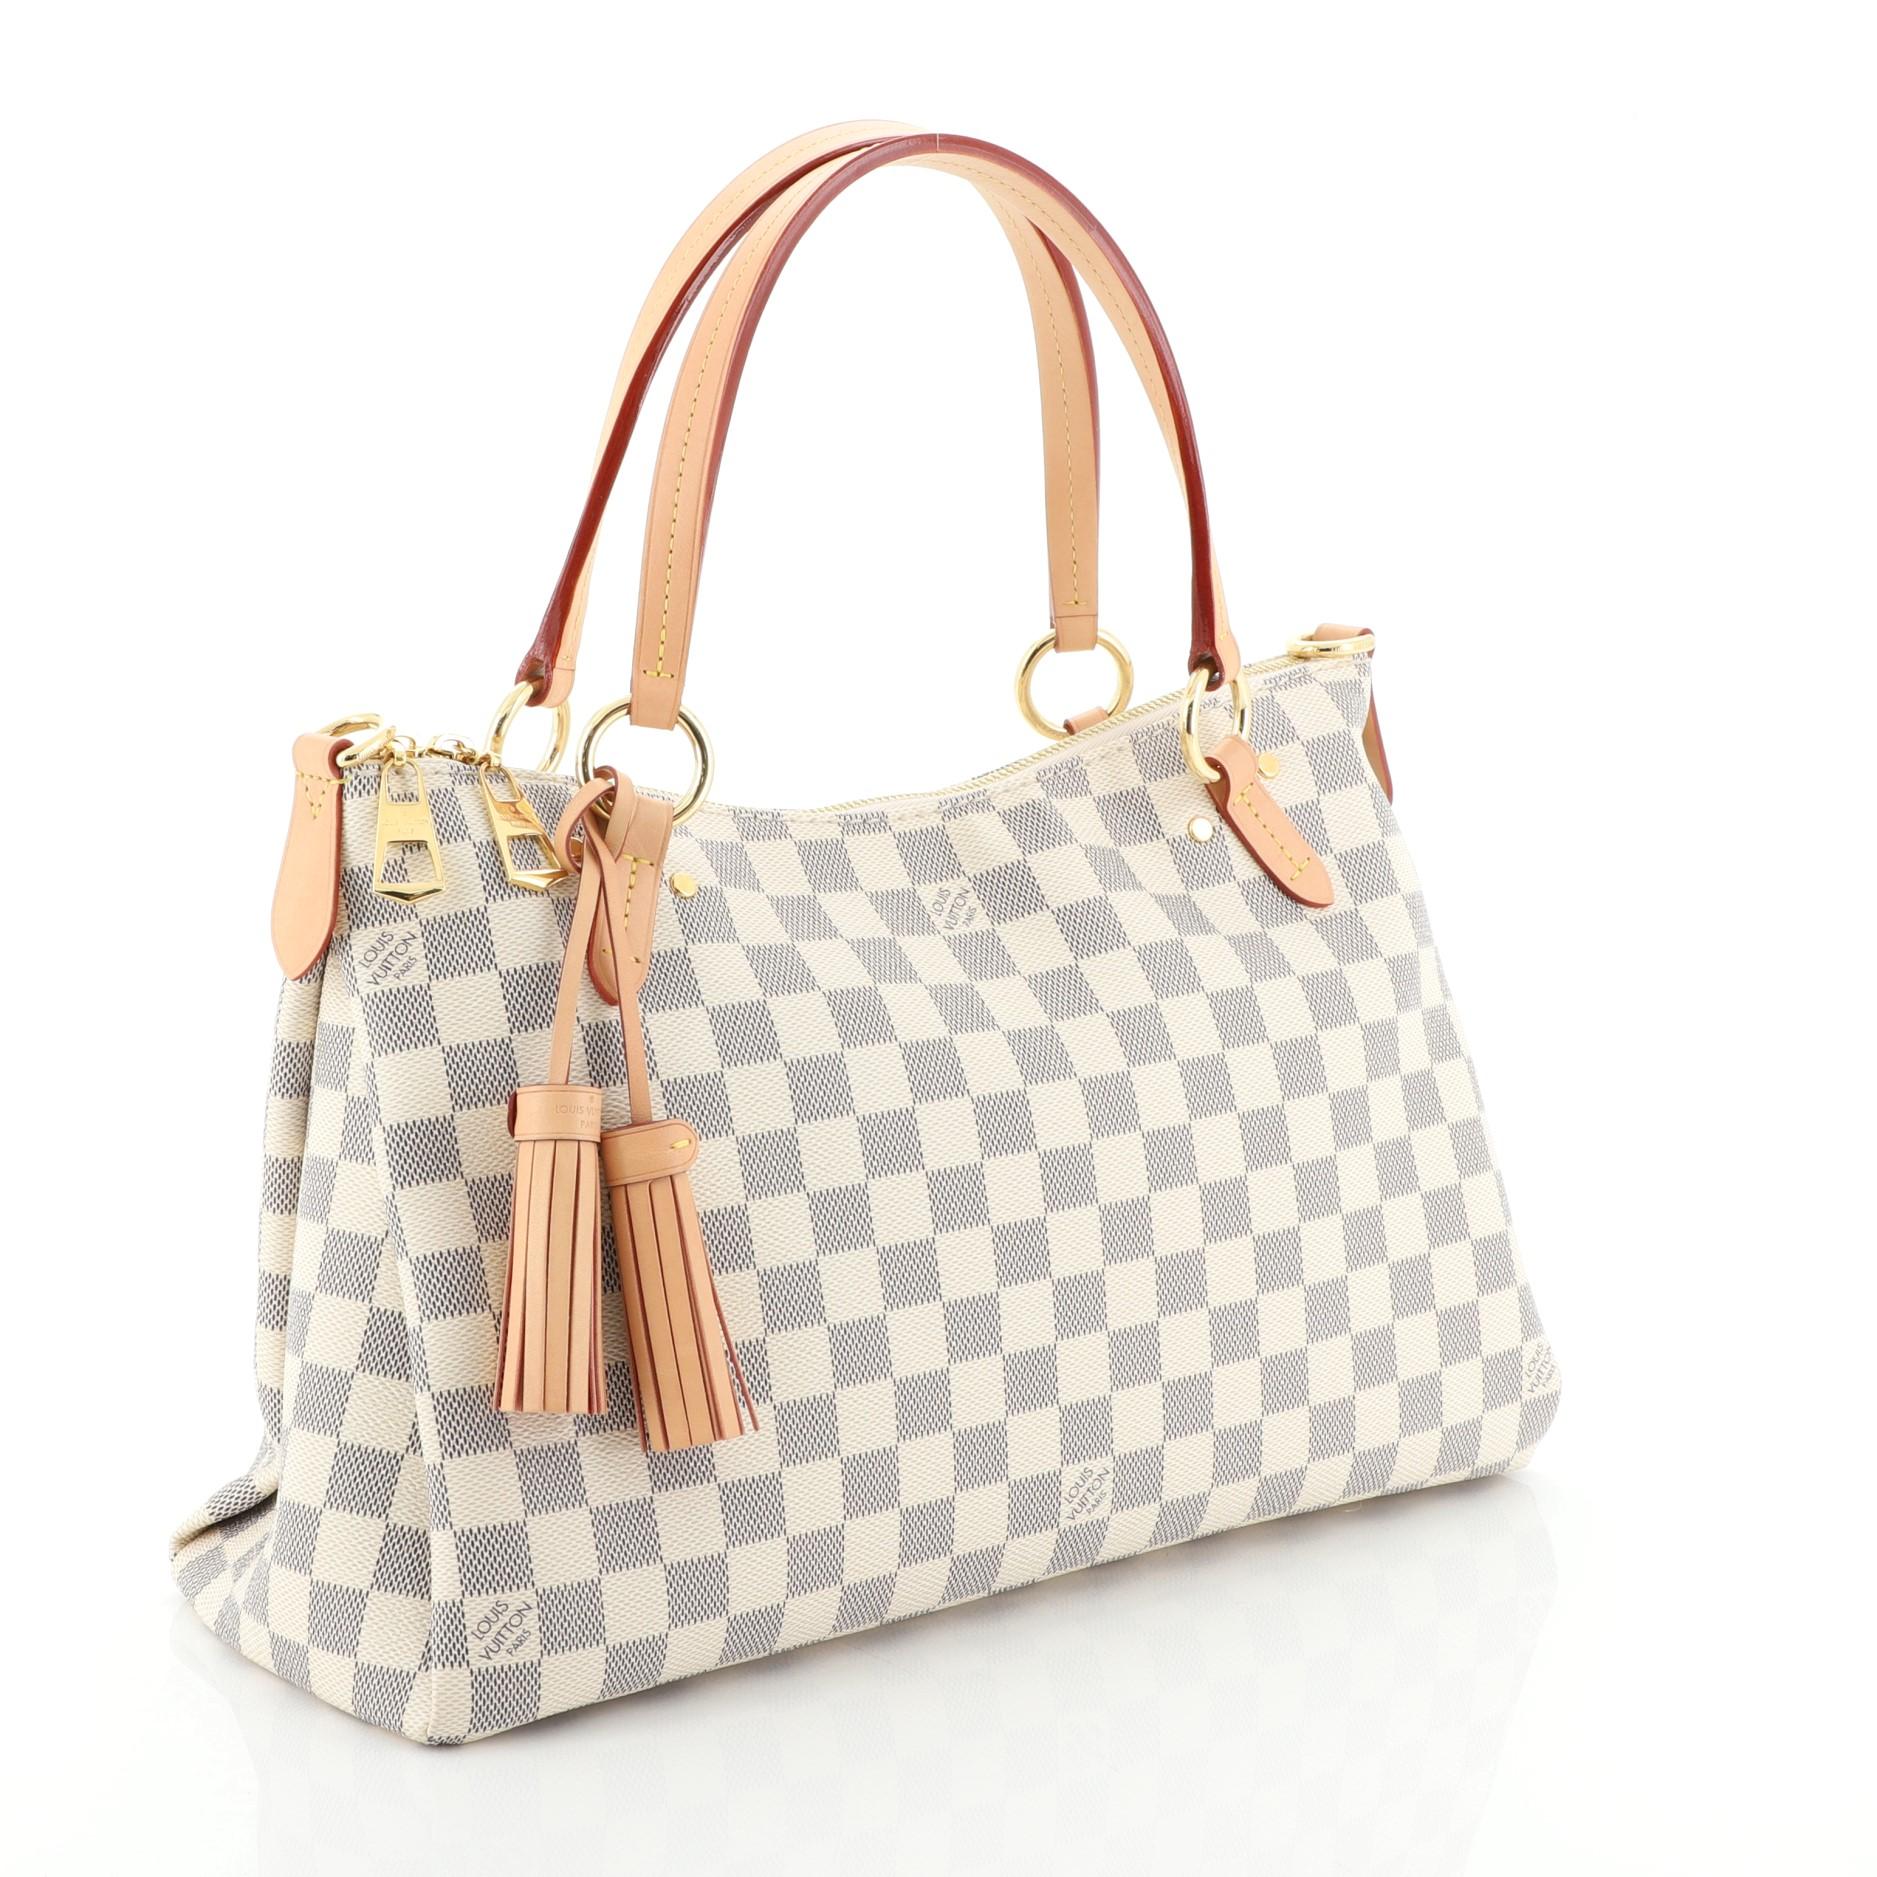 This Louis Vuitton Lymington Handbag Damier, crafted from damier azur coated canvas, features dual flat handles, leather tassels, and gold-tone hardware. Its zip closure opens to a pink fabric interior with slip pocket. Authenticity code reads: